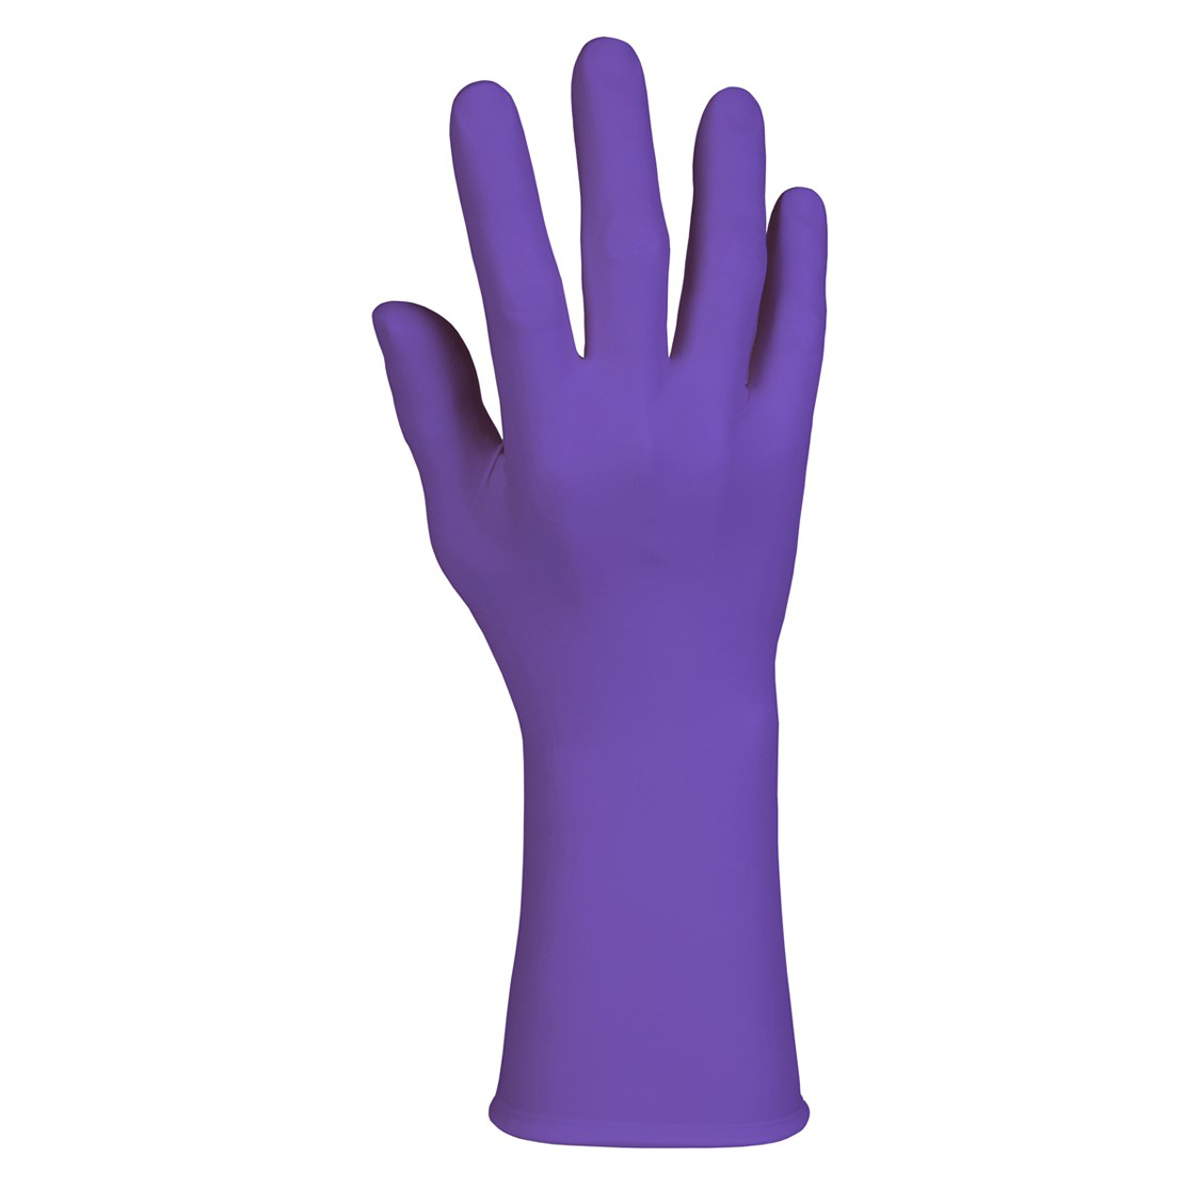 Kimberly-Clark Professional* Small Purple Nitrile-Xtra* 6 mil Nitrile Disposable Exam Gloves (50 Gloves Per Box) (Availability r